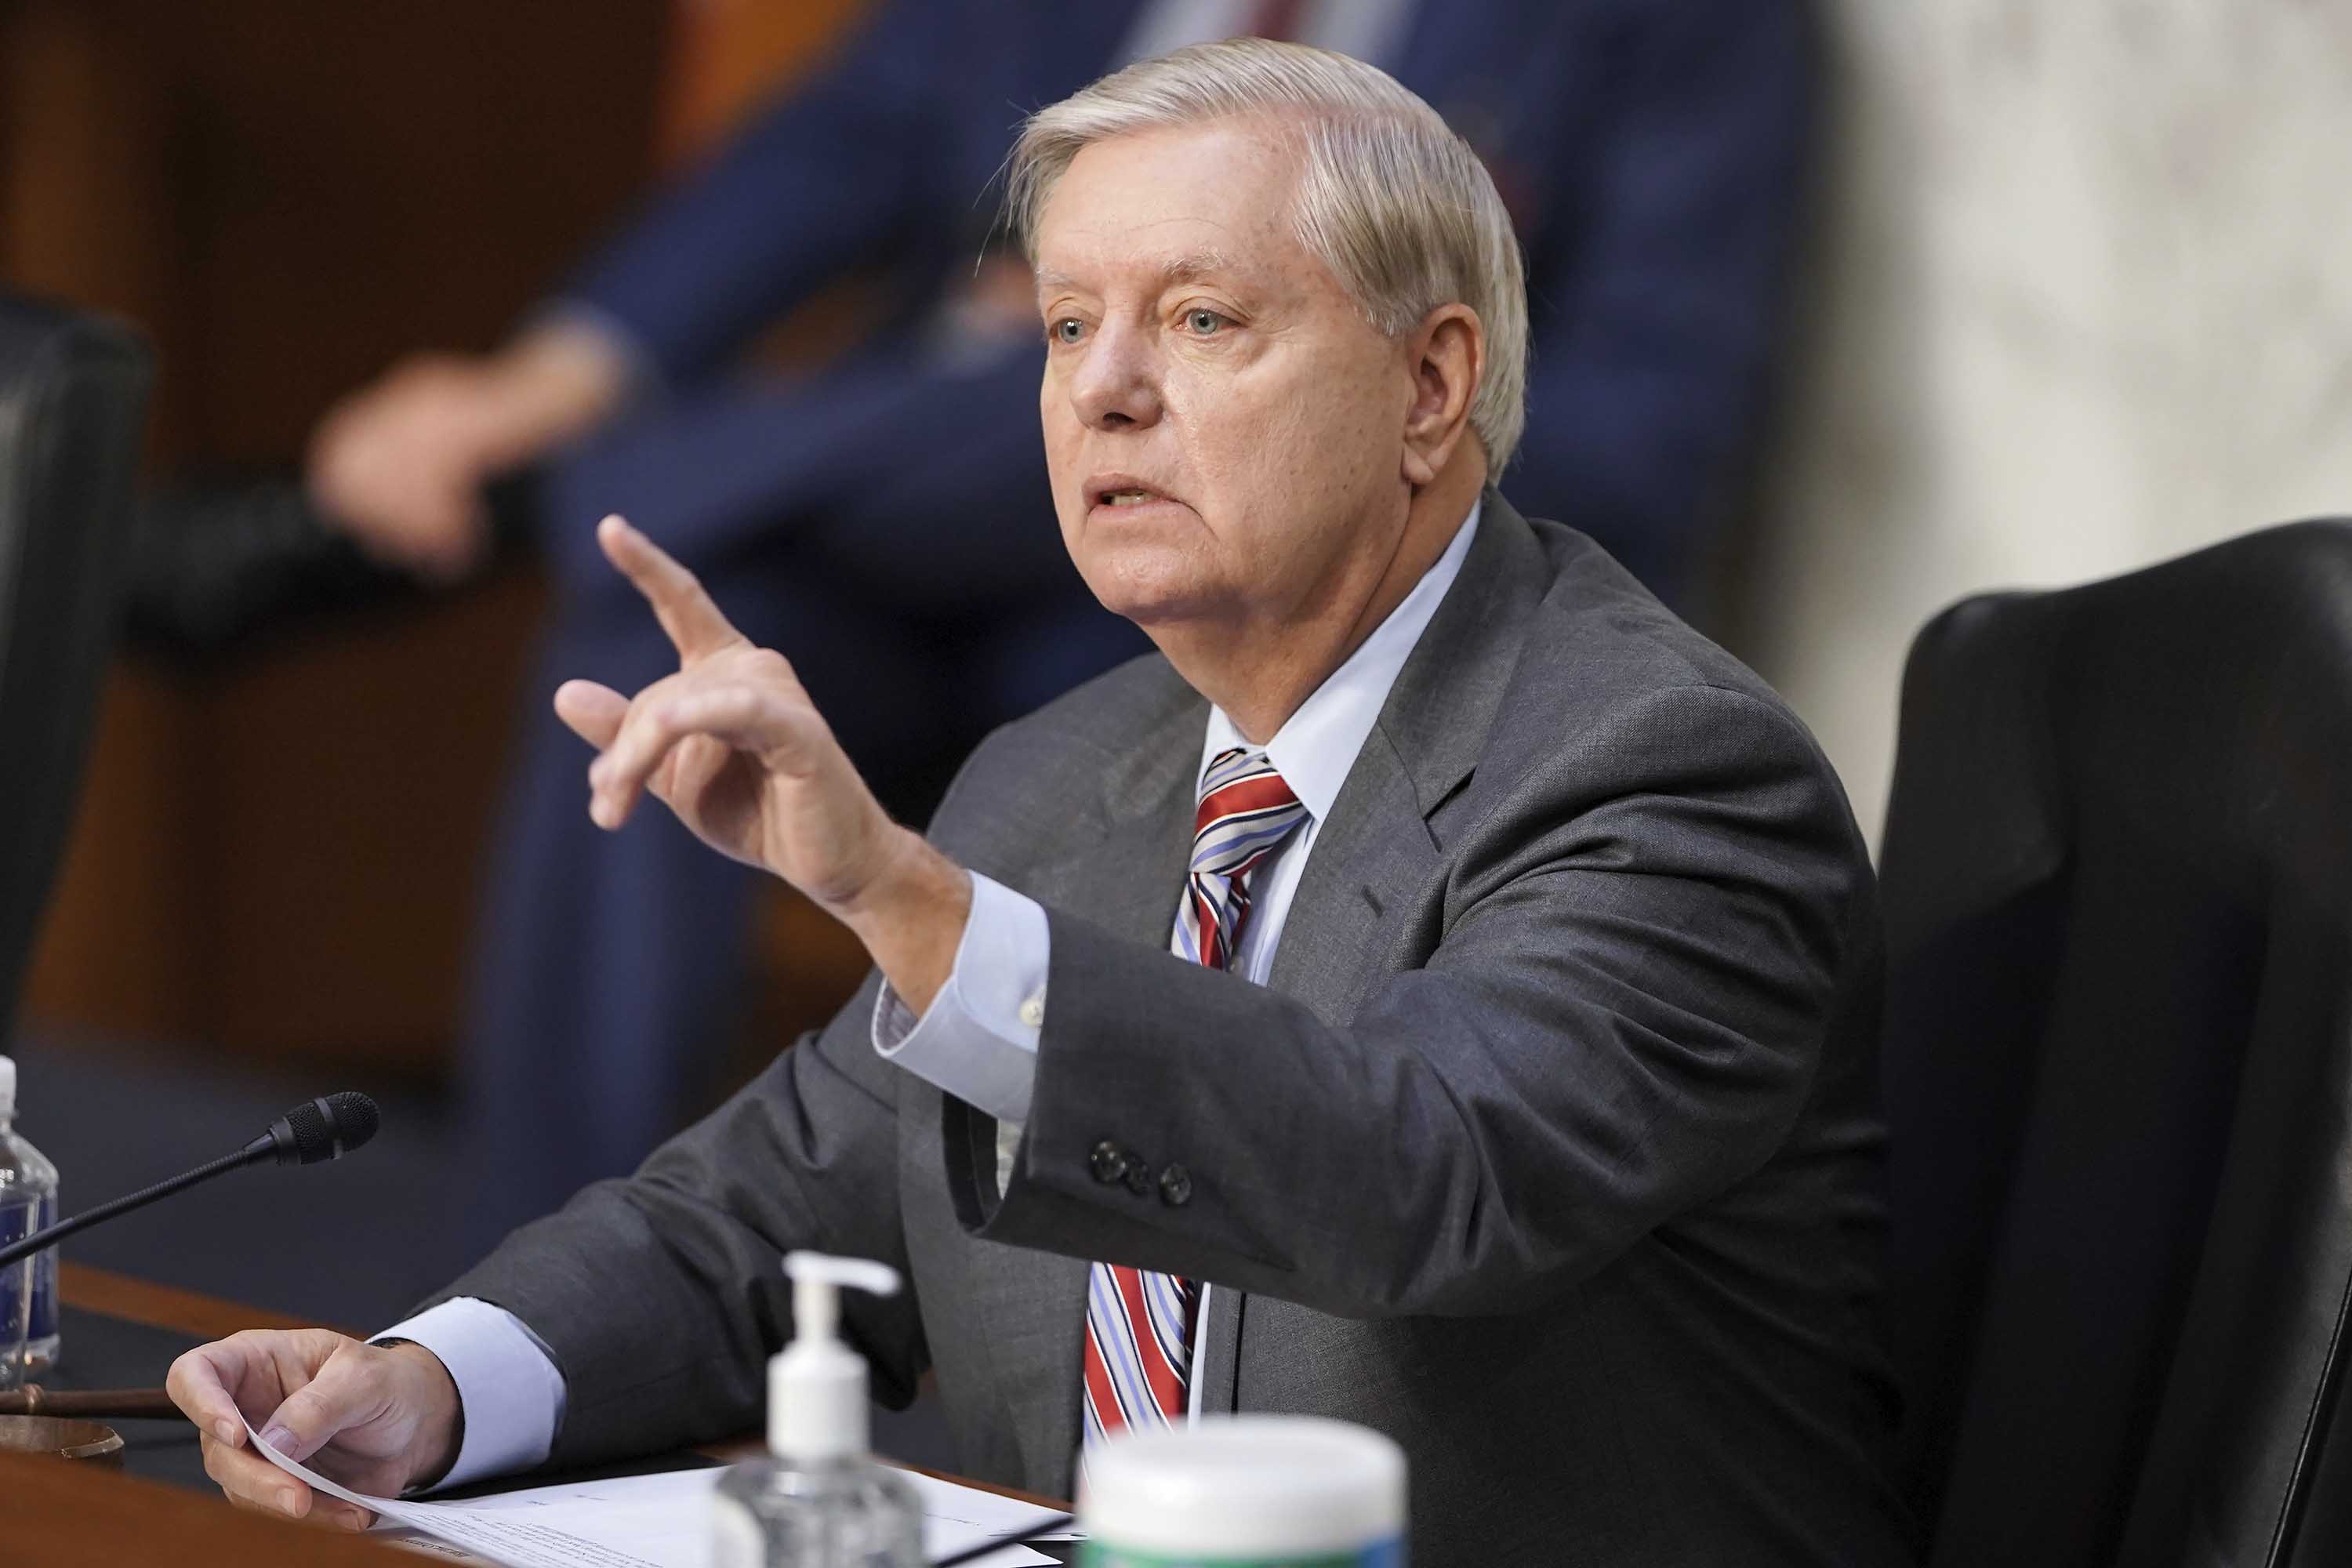 Sen. Lindsey Graham, R-S.C., speaks during the confirmation hearing for Supreme Court nominee Amy Coney Barrett, before the Senate Judiciary Committee, Thursday, Oct. 15, 2020, on Capitol Hill in Washington. (Greg Nash/Pool via AP)